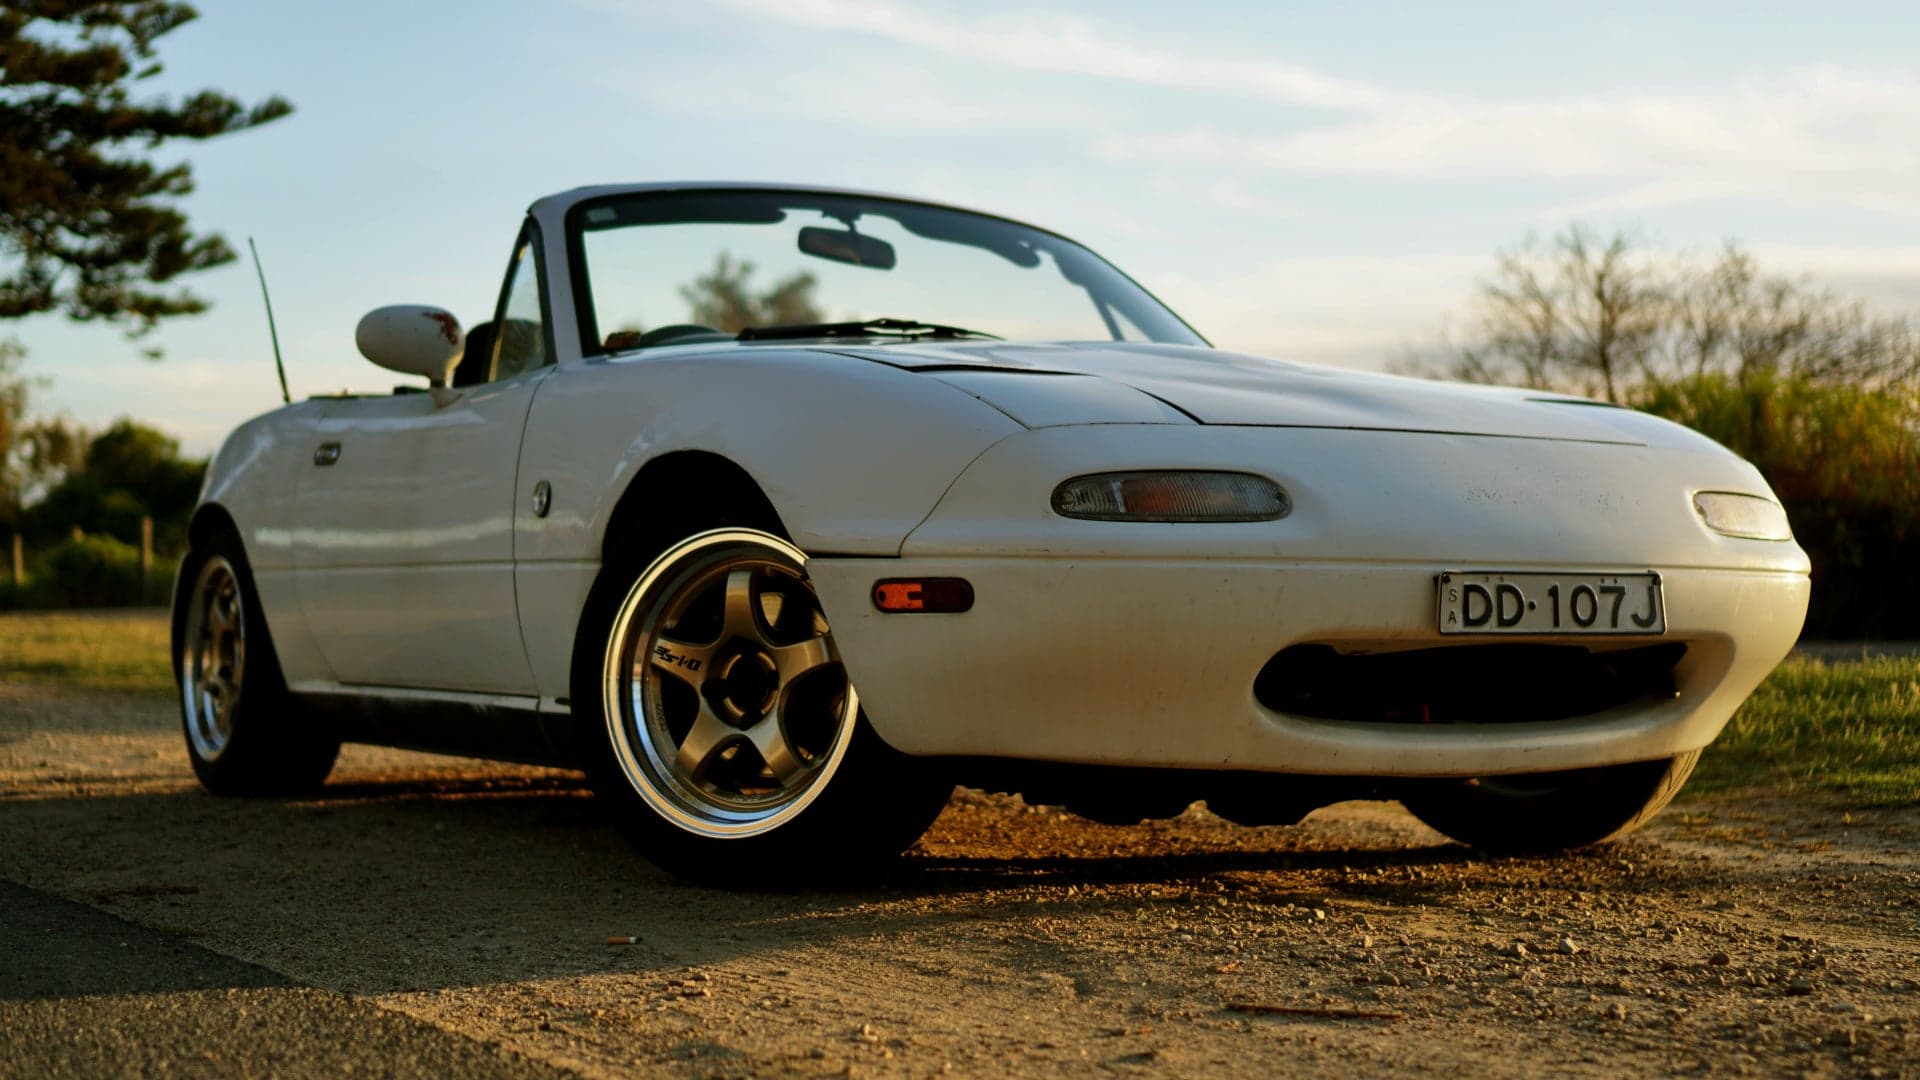 I Never Loved My Project Miata. So Why Does Selling It Hurt so Much?